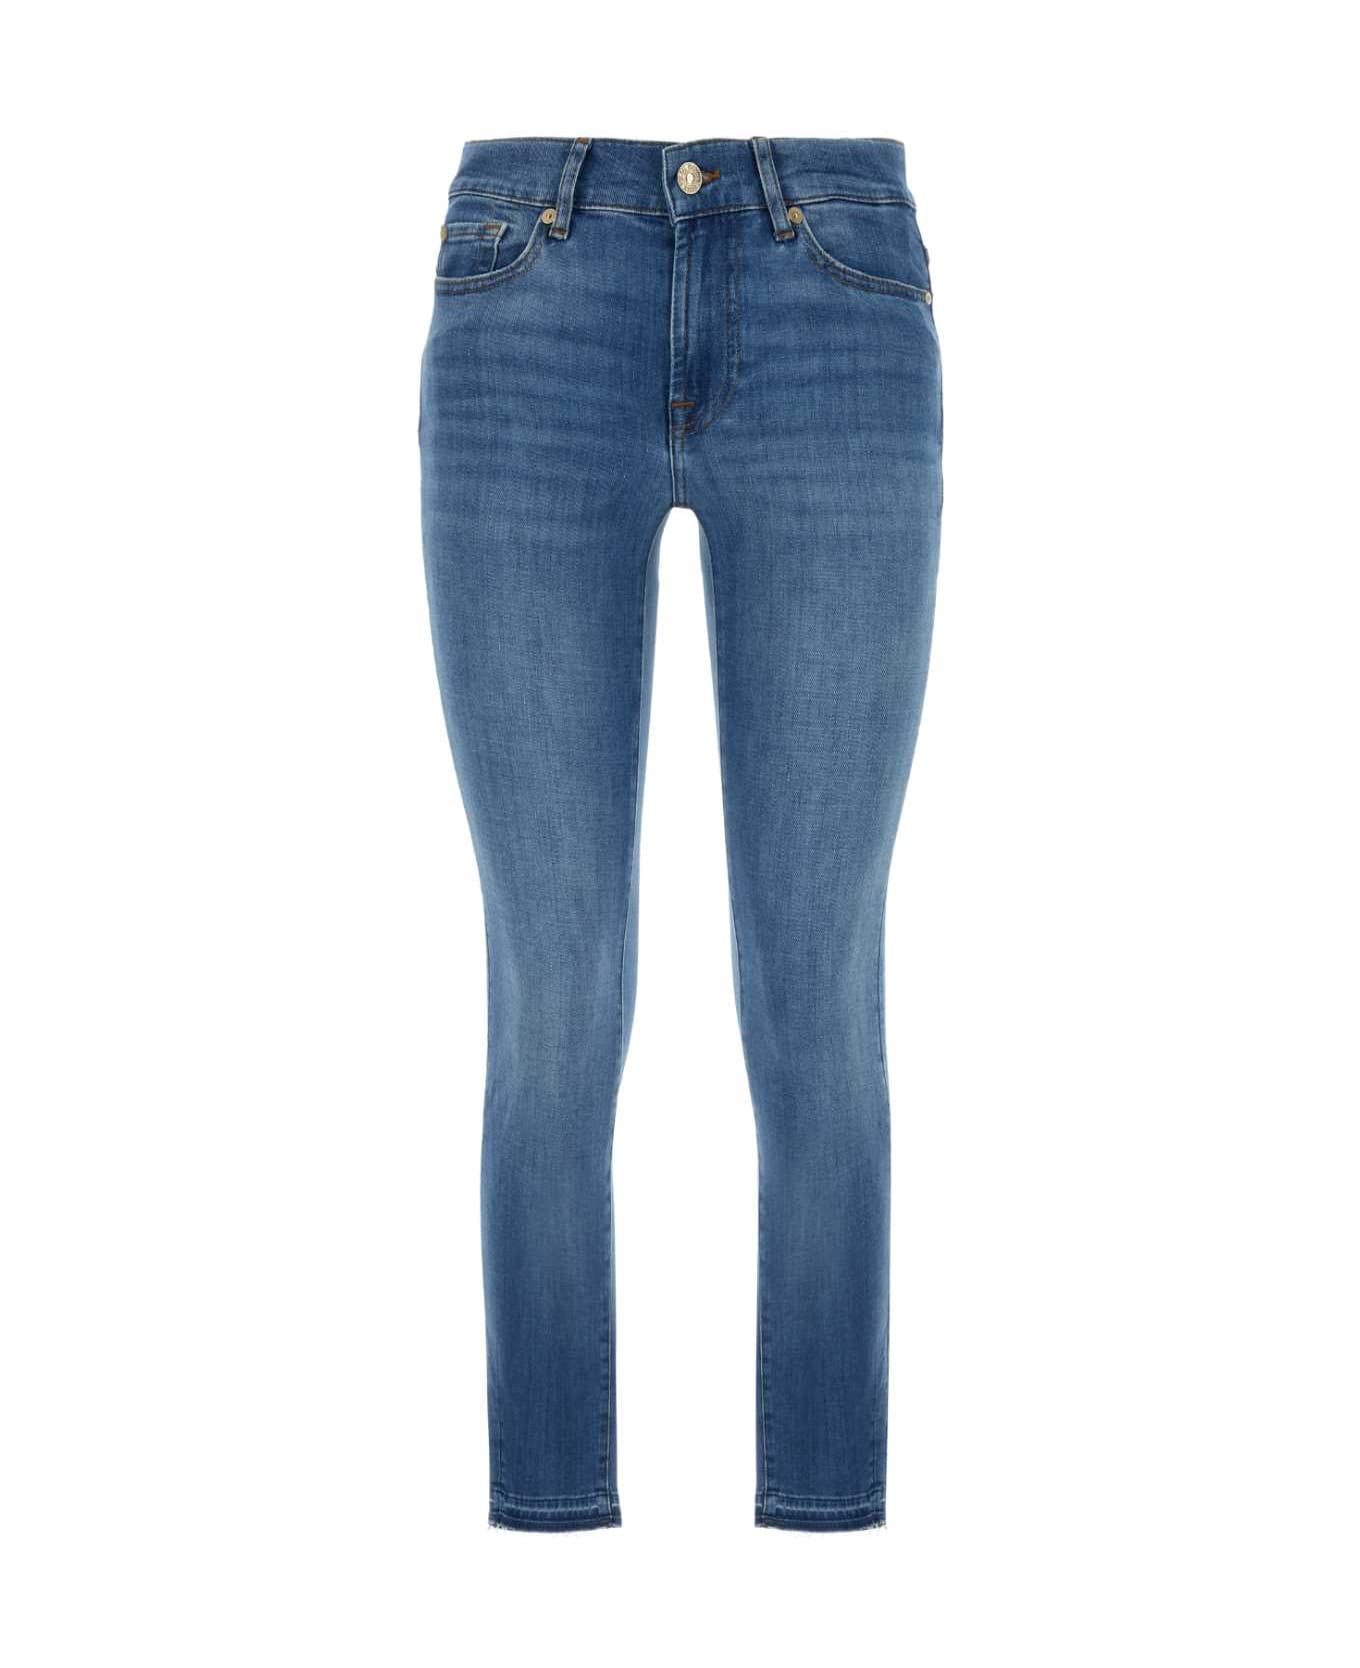 7 For All Mankind Stretch Denim Roxanne Jeans - LAVAGGIOSCURO